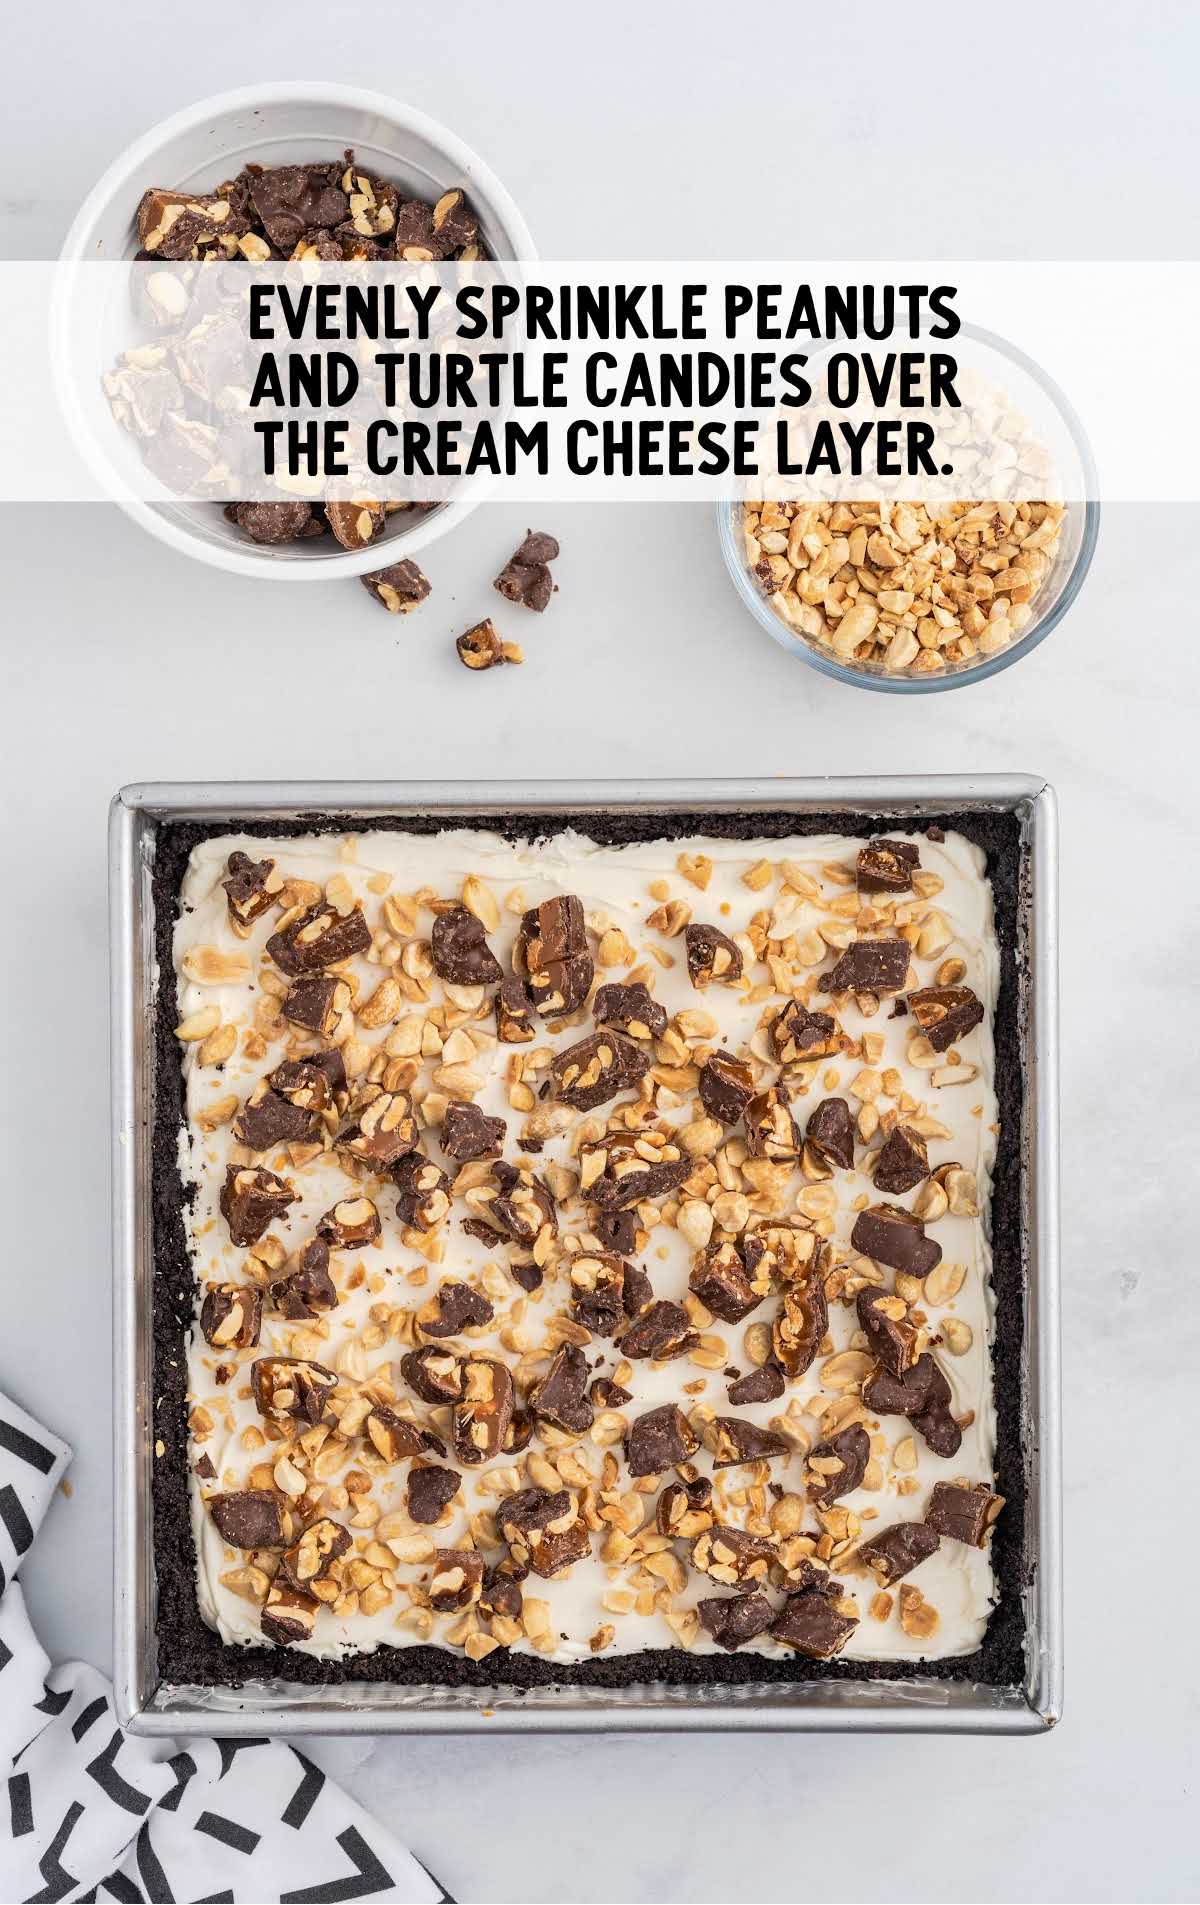 peanuts and turtle candies sprinkled over the cream cheese layer